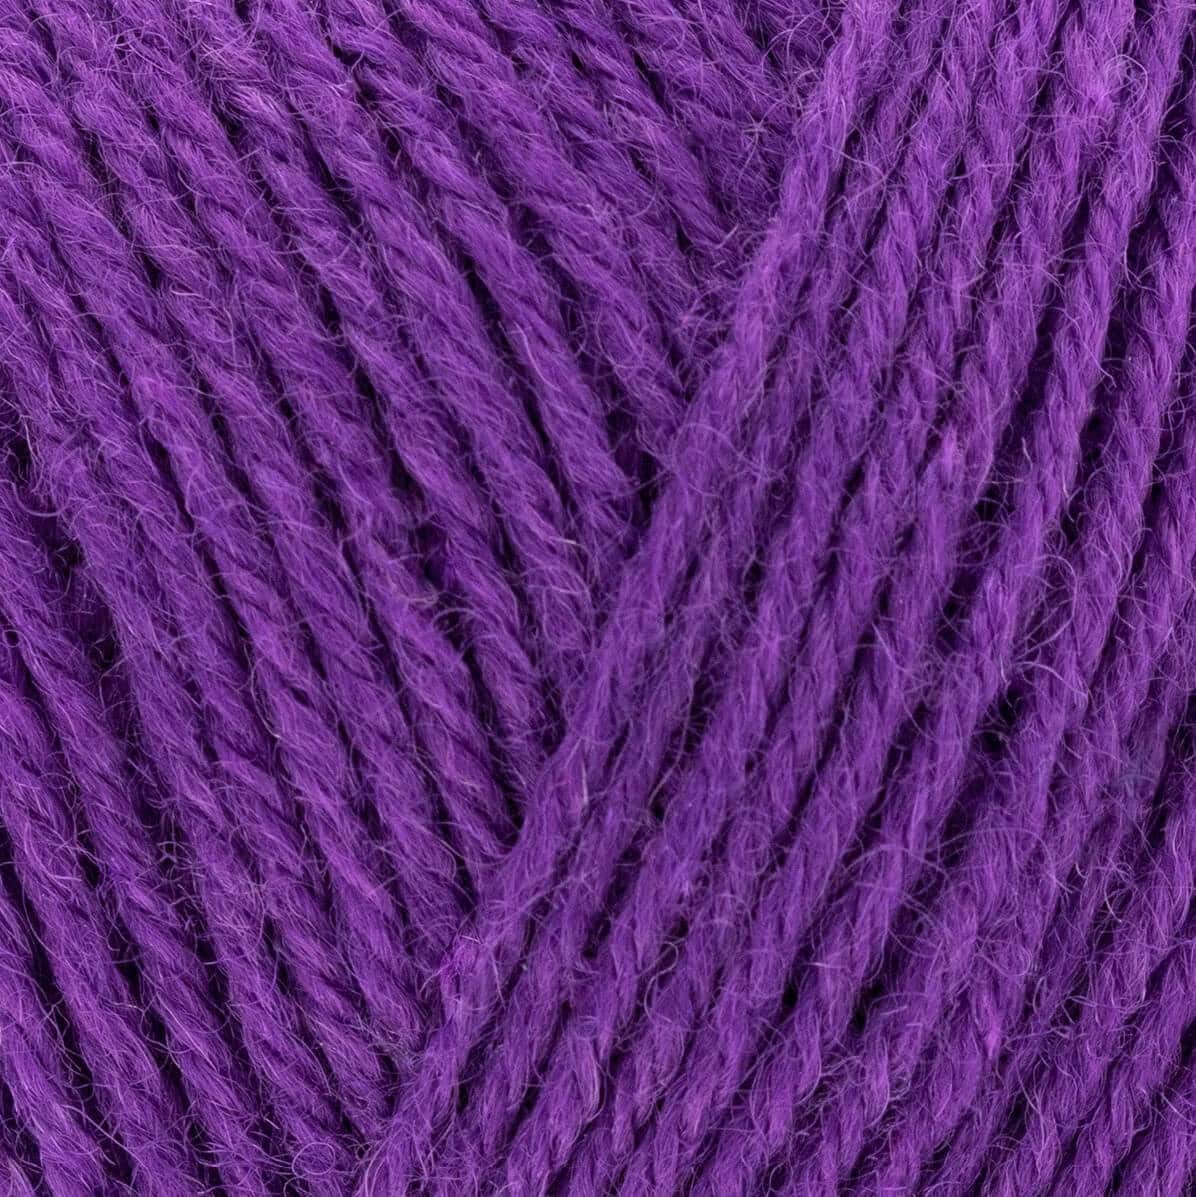 West Yorkshire Spinners Signature 4ply - Amethyst 1003